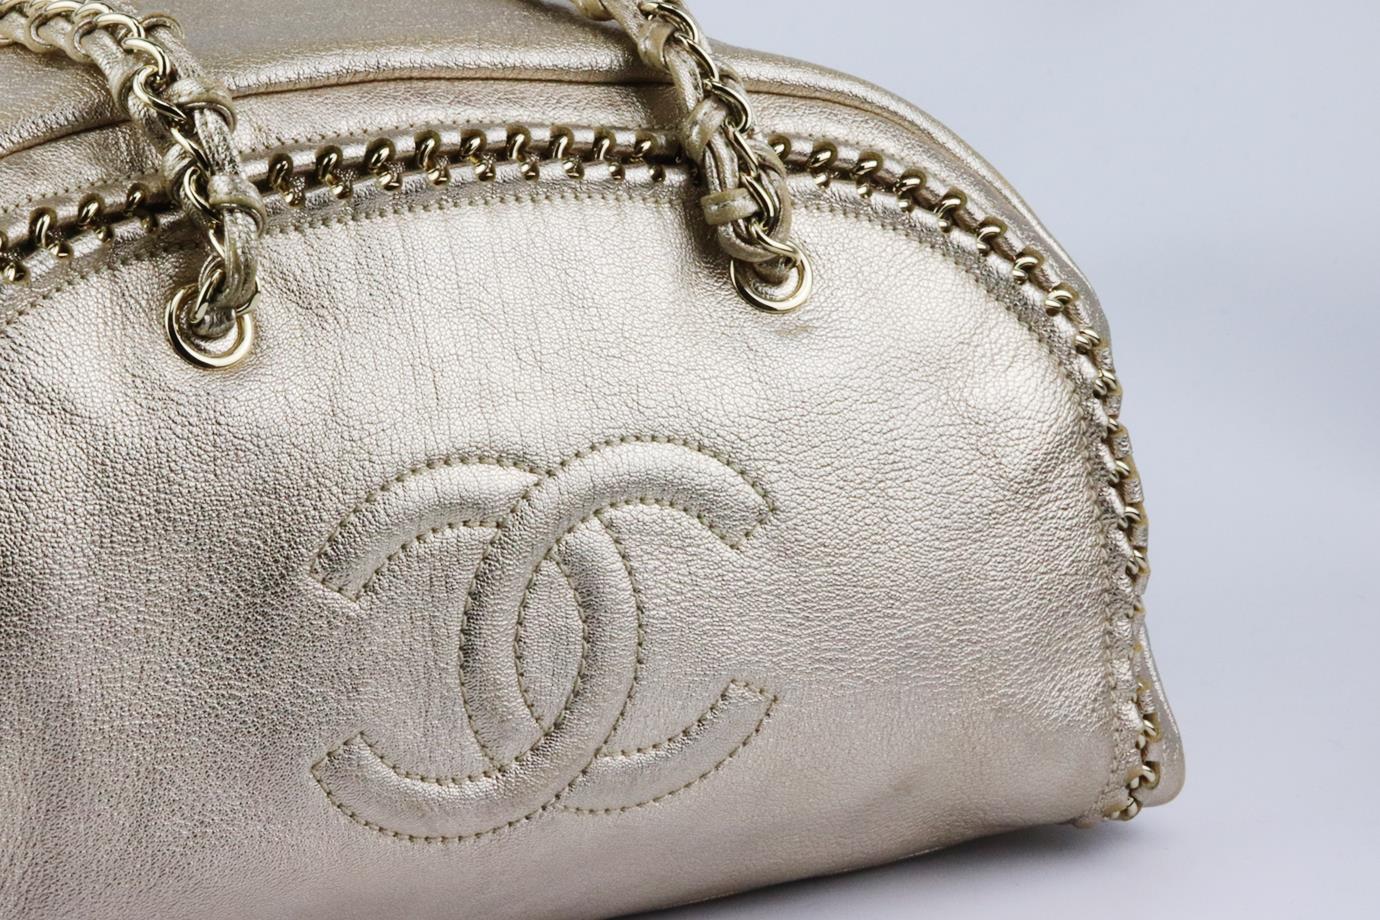 Made in Italy, this beautiful 2006 Chanel ‘Luxe Ligne' shoulder bag has been made from gold grained leather exterior, this piece is decorated with a large embroidered CC on the front and Chanel's gold-tone chain and leather shoulder straps. Gold